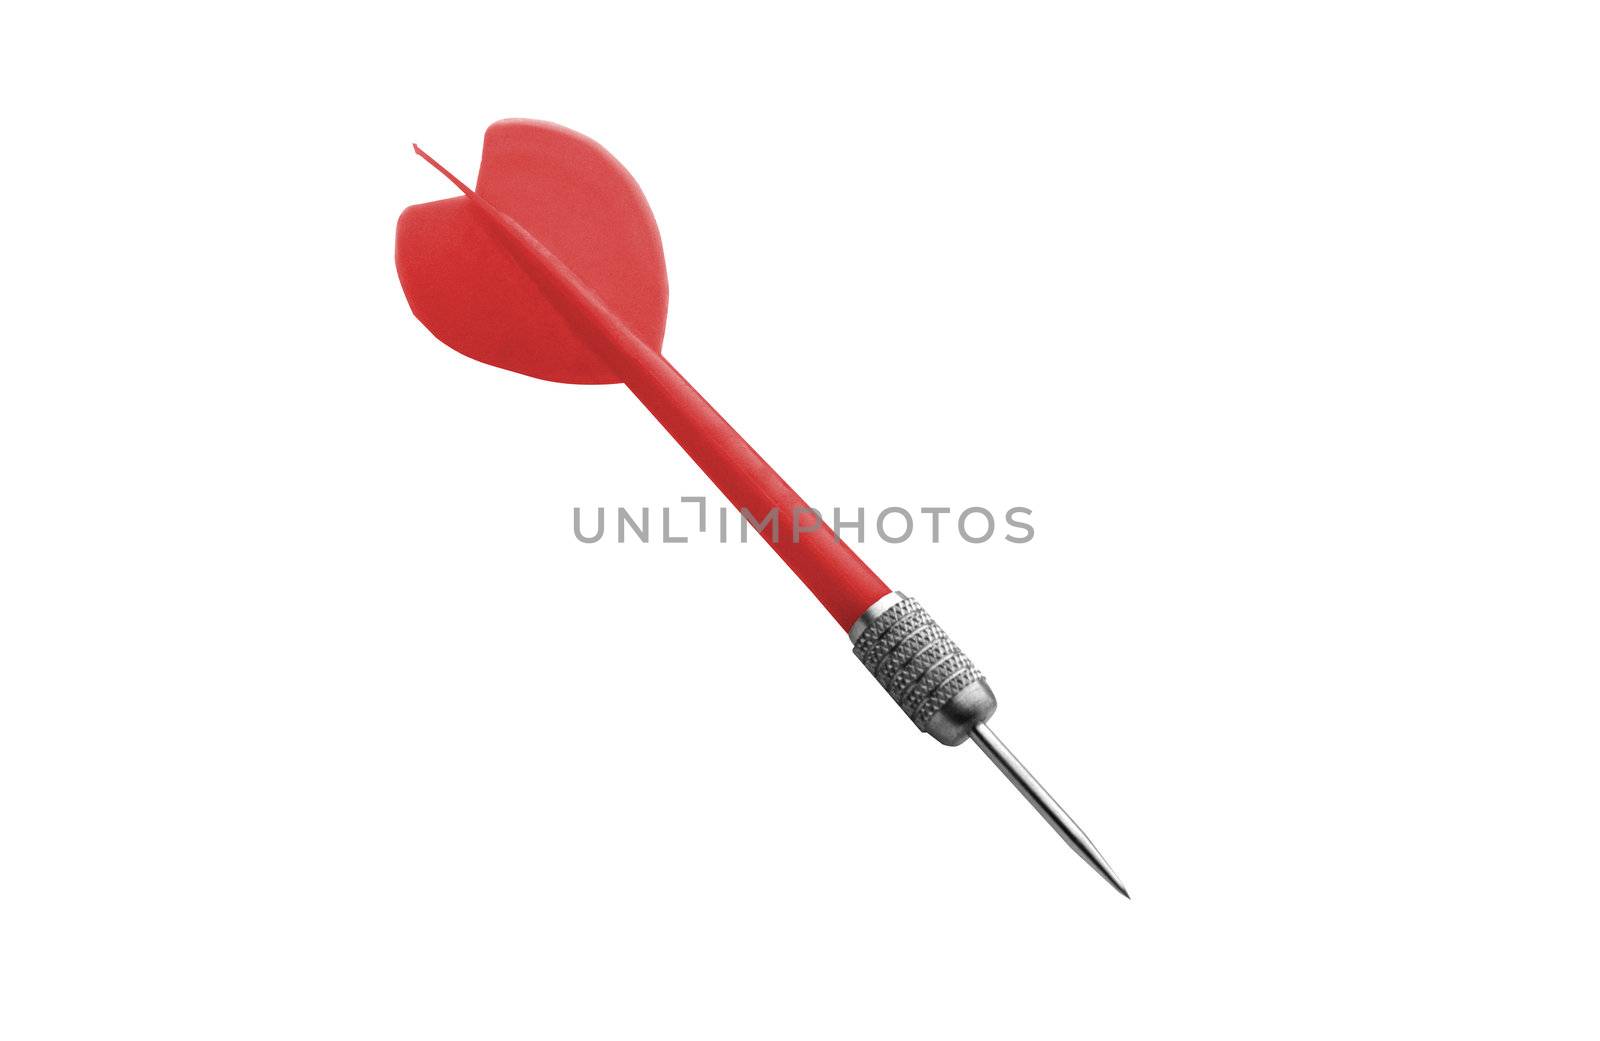 Game darts. It is isolated on a white by shutswis